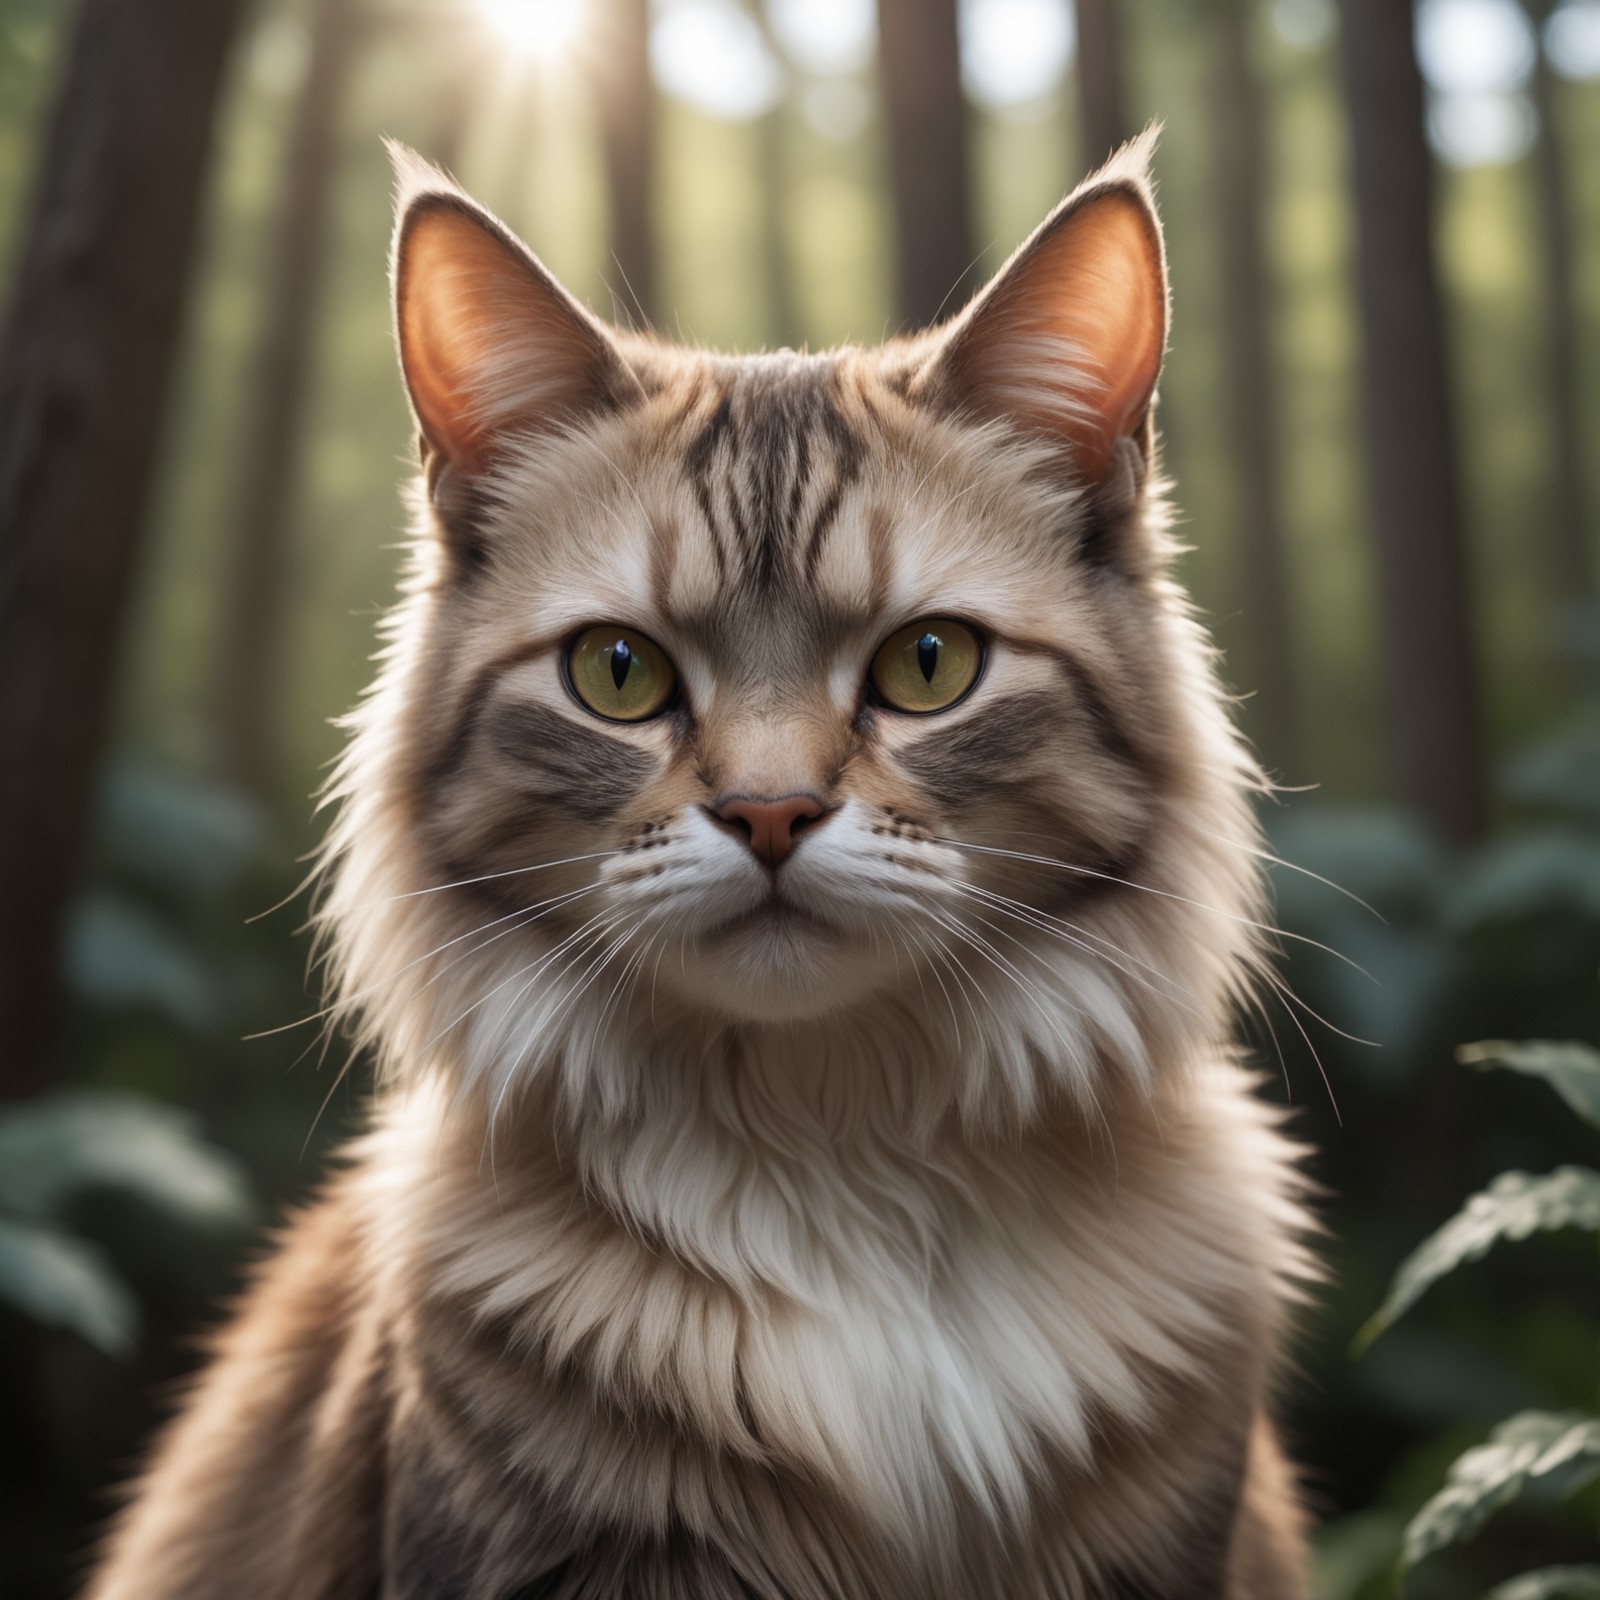 photo closeup of a cat  forest background, natural light